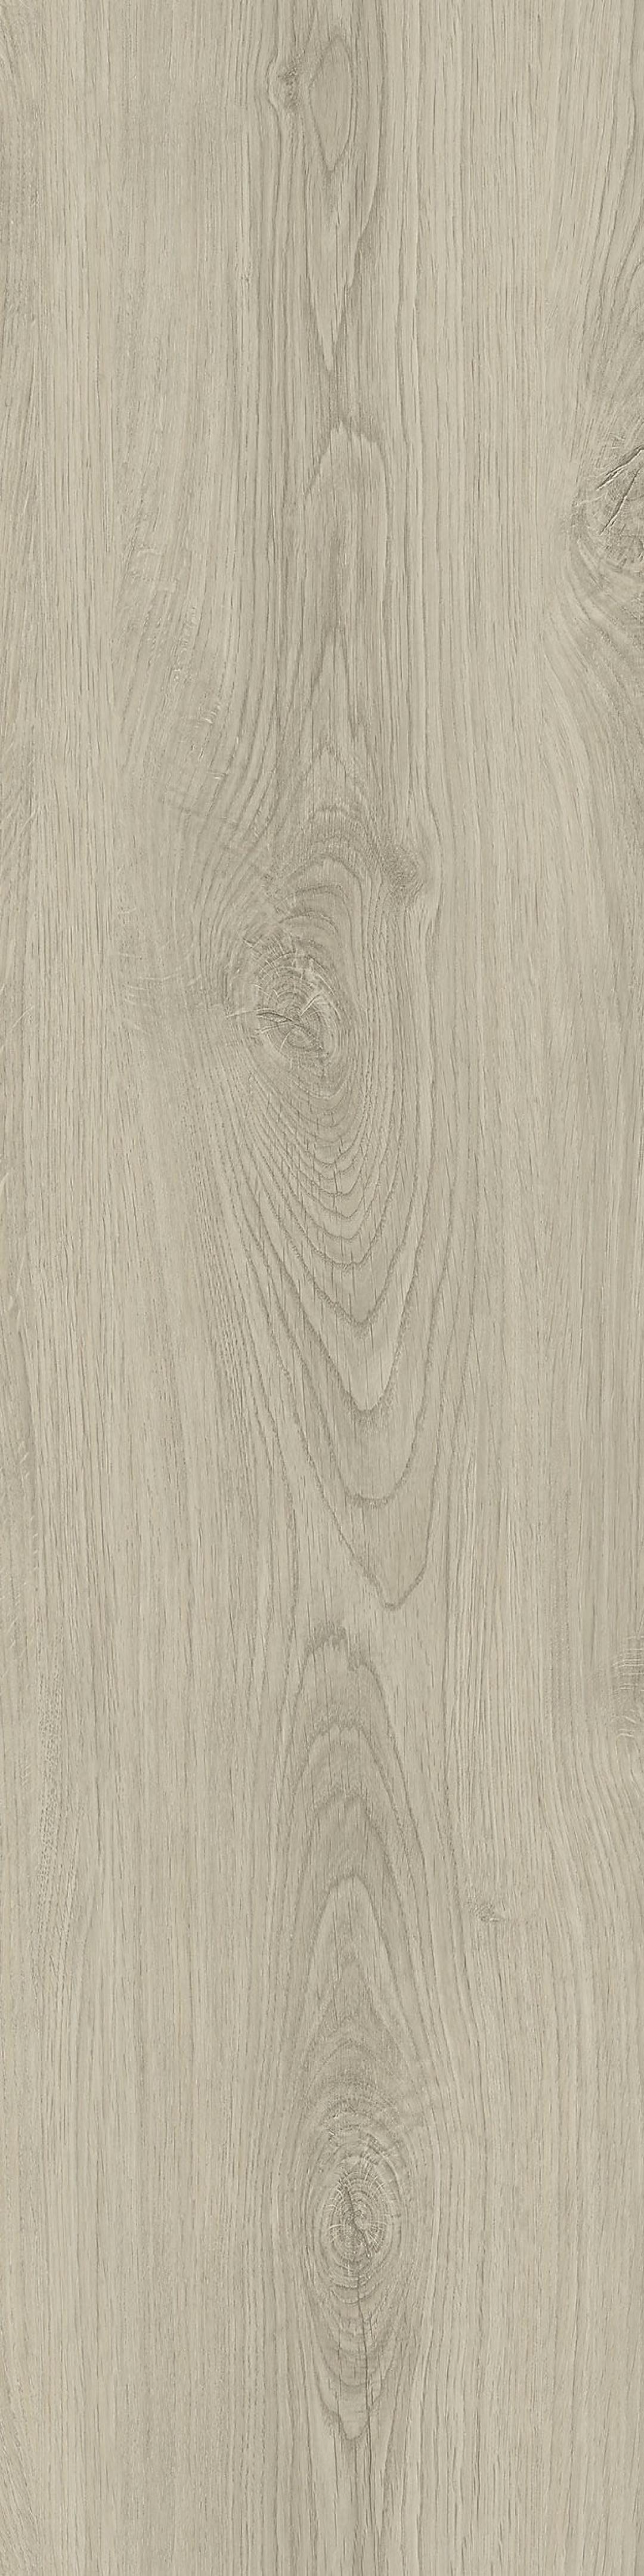 Level Set - Natural Woodgrains - Sand Dune from Inzide